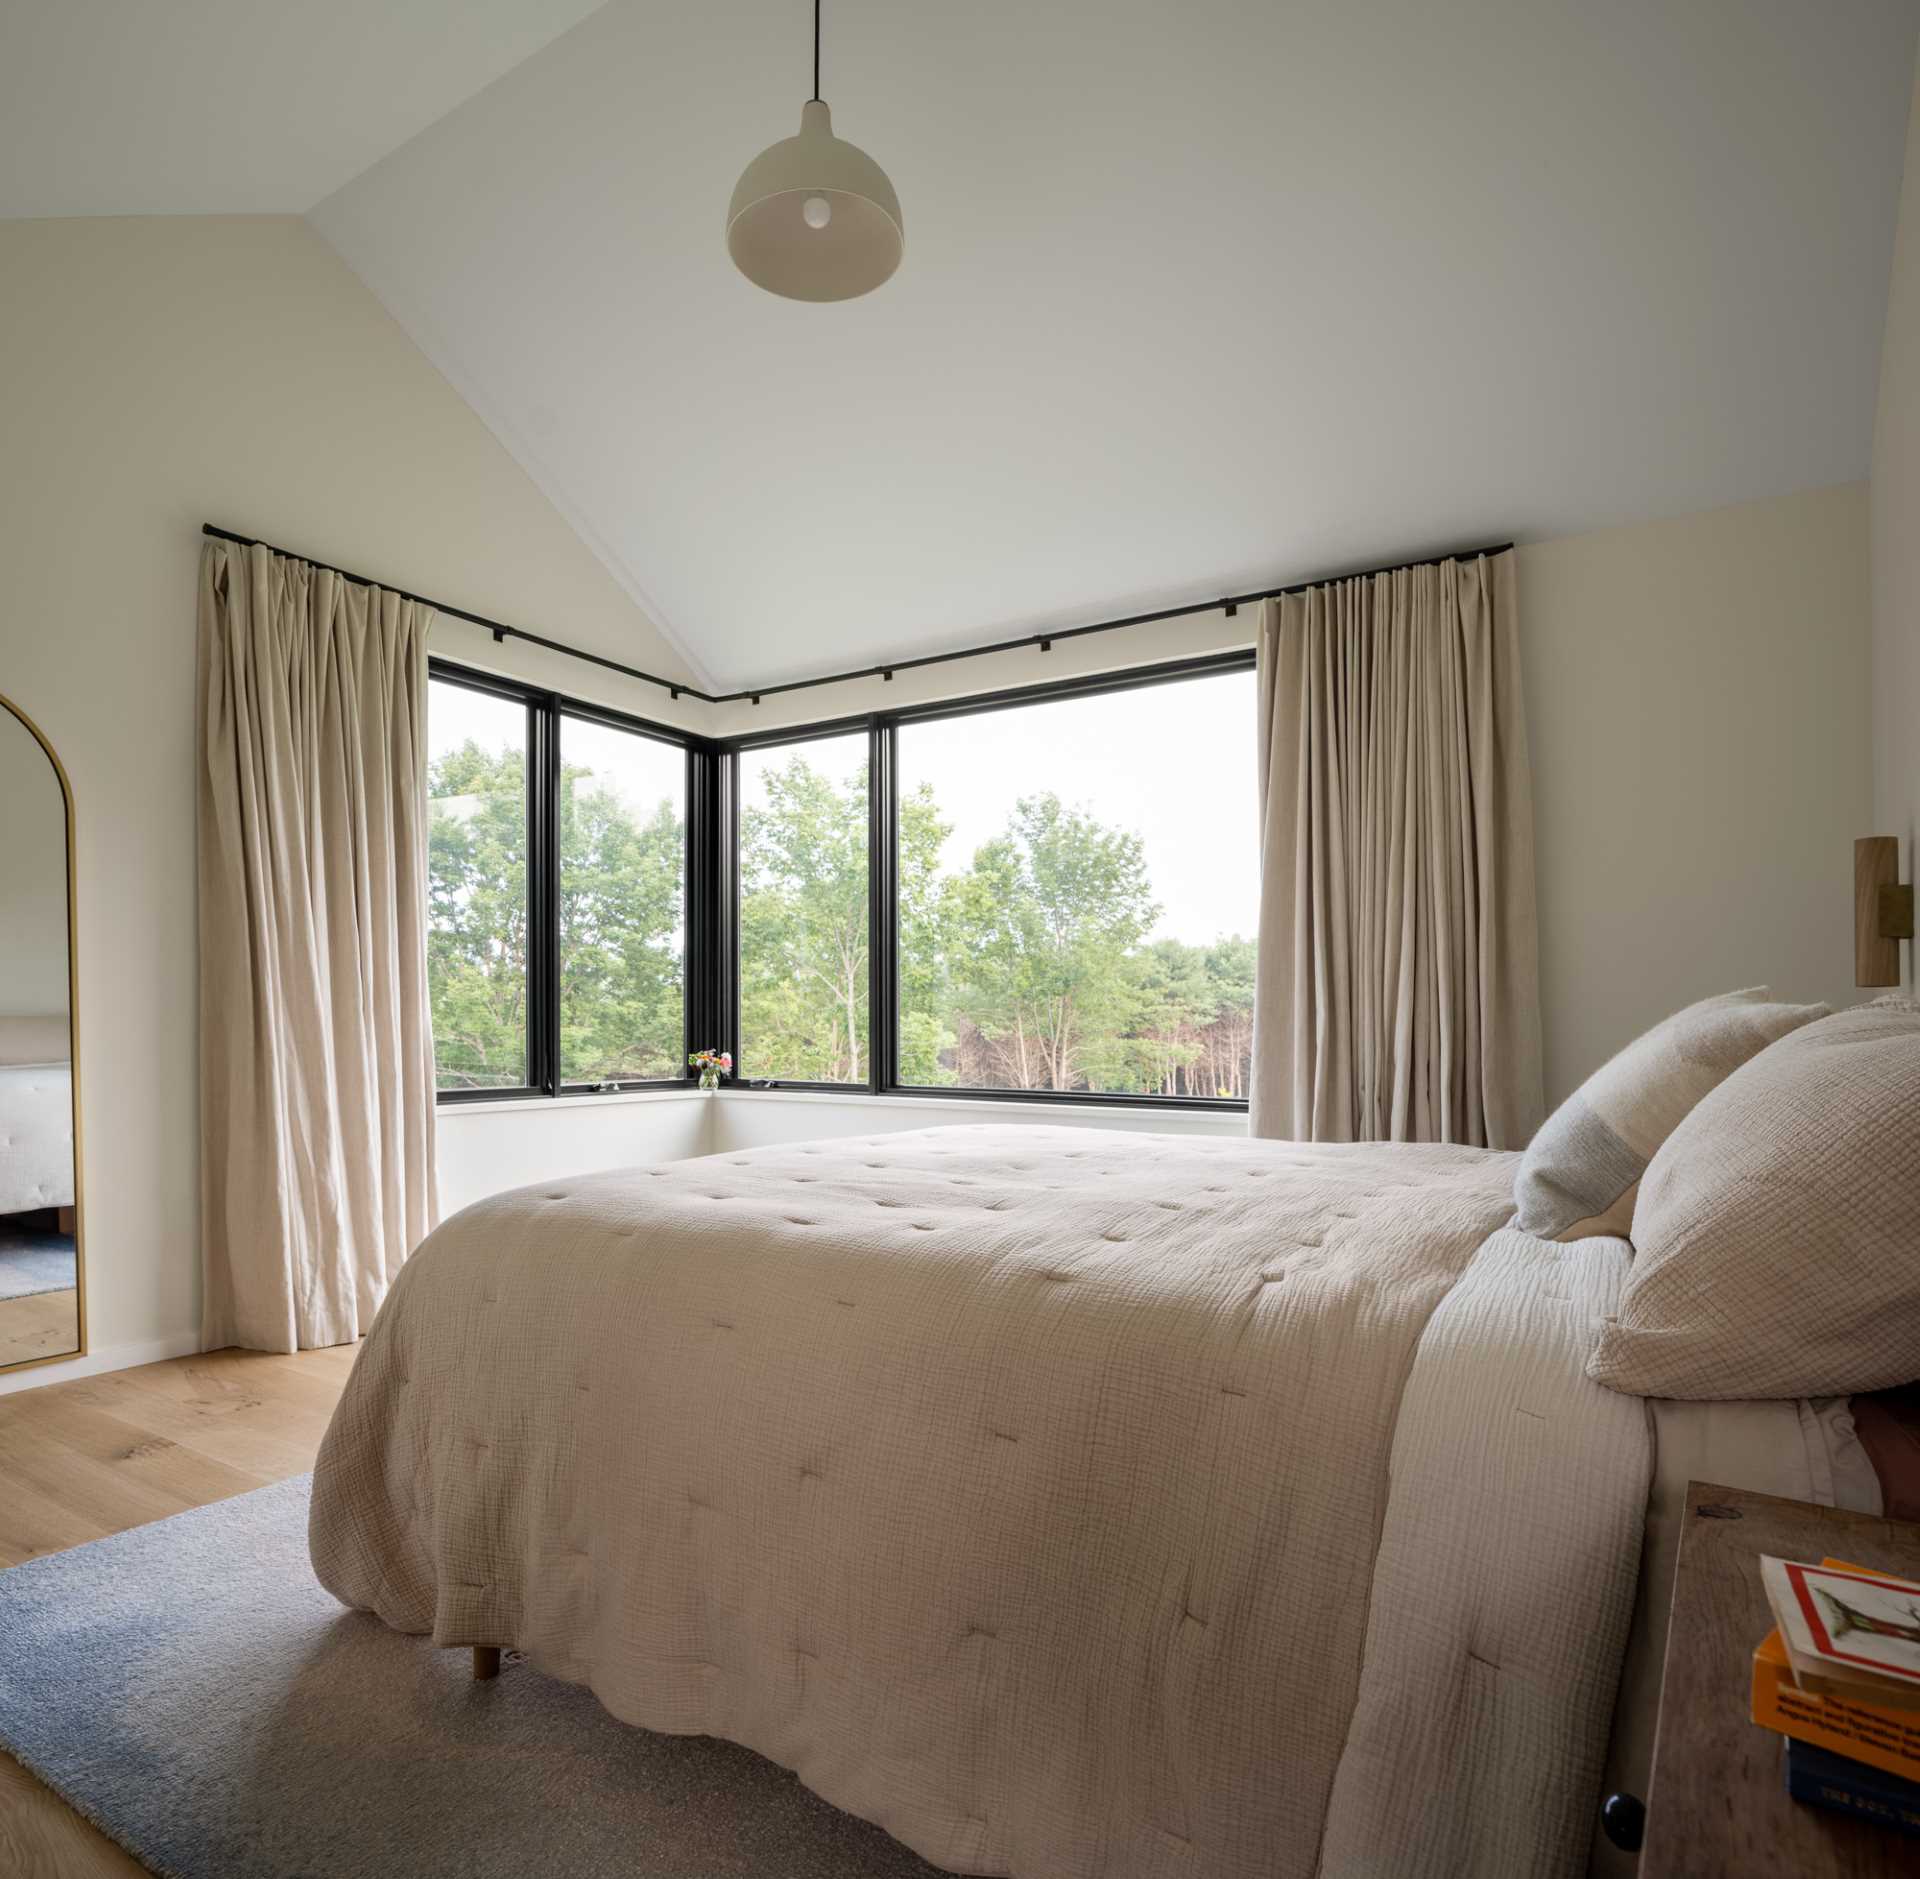 In this modern bedroom, light furnishings and curtains keep the room light and relaxing.